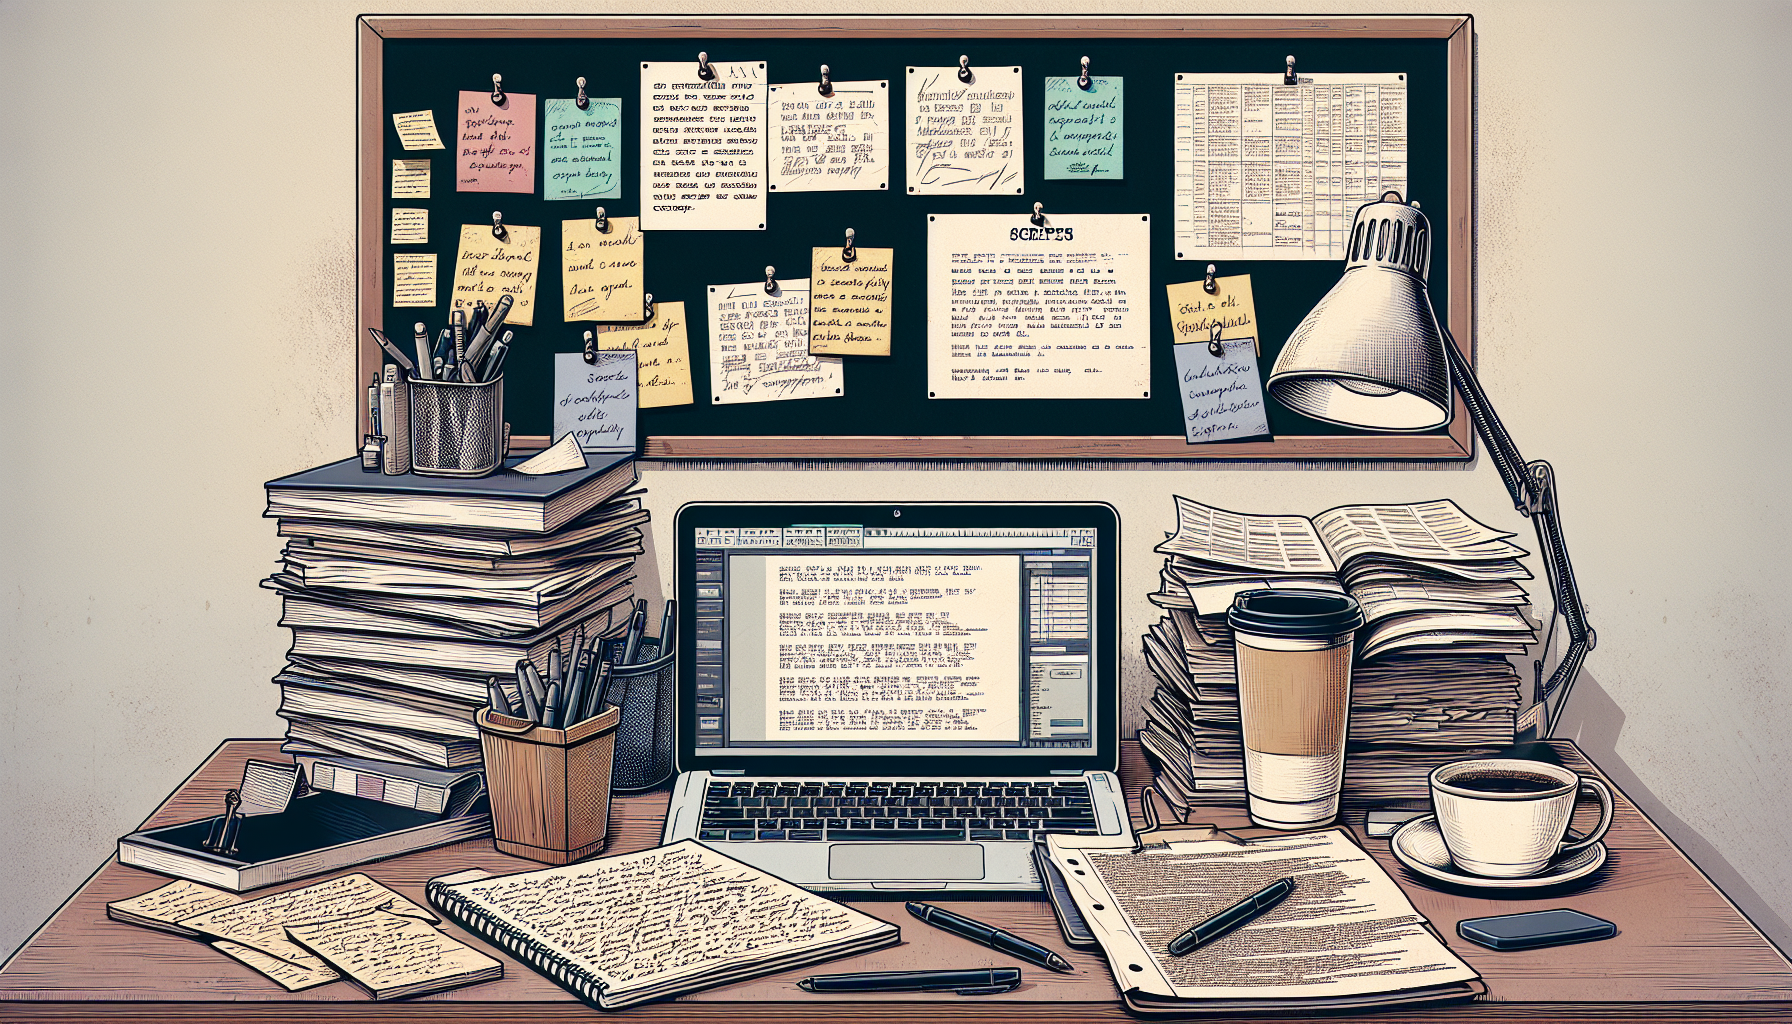 Create an illustration of a writer's desk filled with scriptwriting essentials: a laptop displaying scriptwriting software, stacks of scripts, notepads filled with handwritten notes, and a coffee cup. In the background, there is a bulletin board with pinned index cards outlining a storyline. The atmosphere should be creative and focused, capturing the essence of mastering the art of scriptwriting.